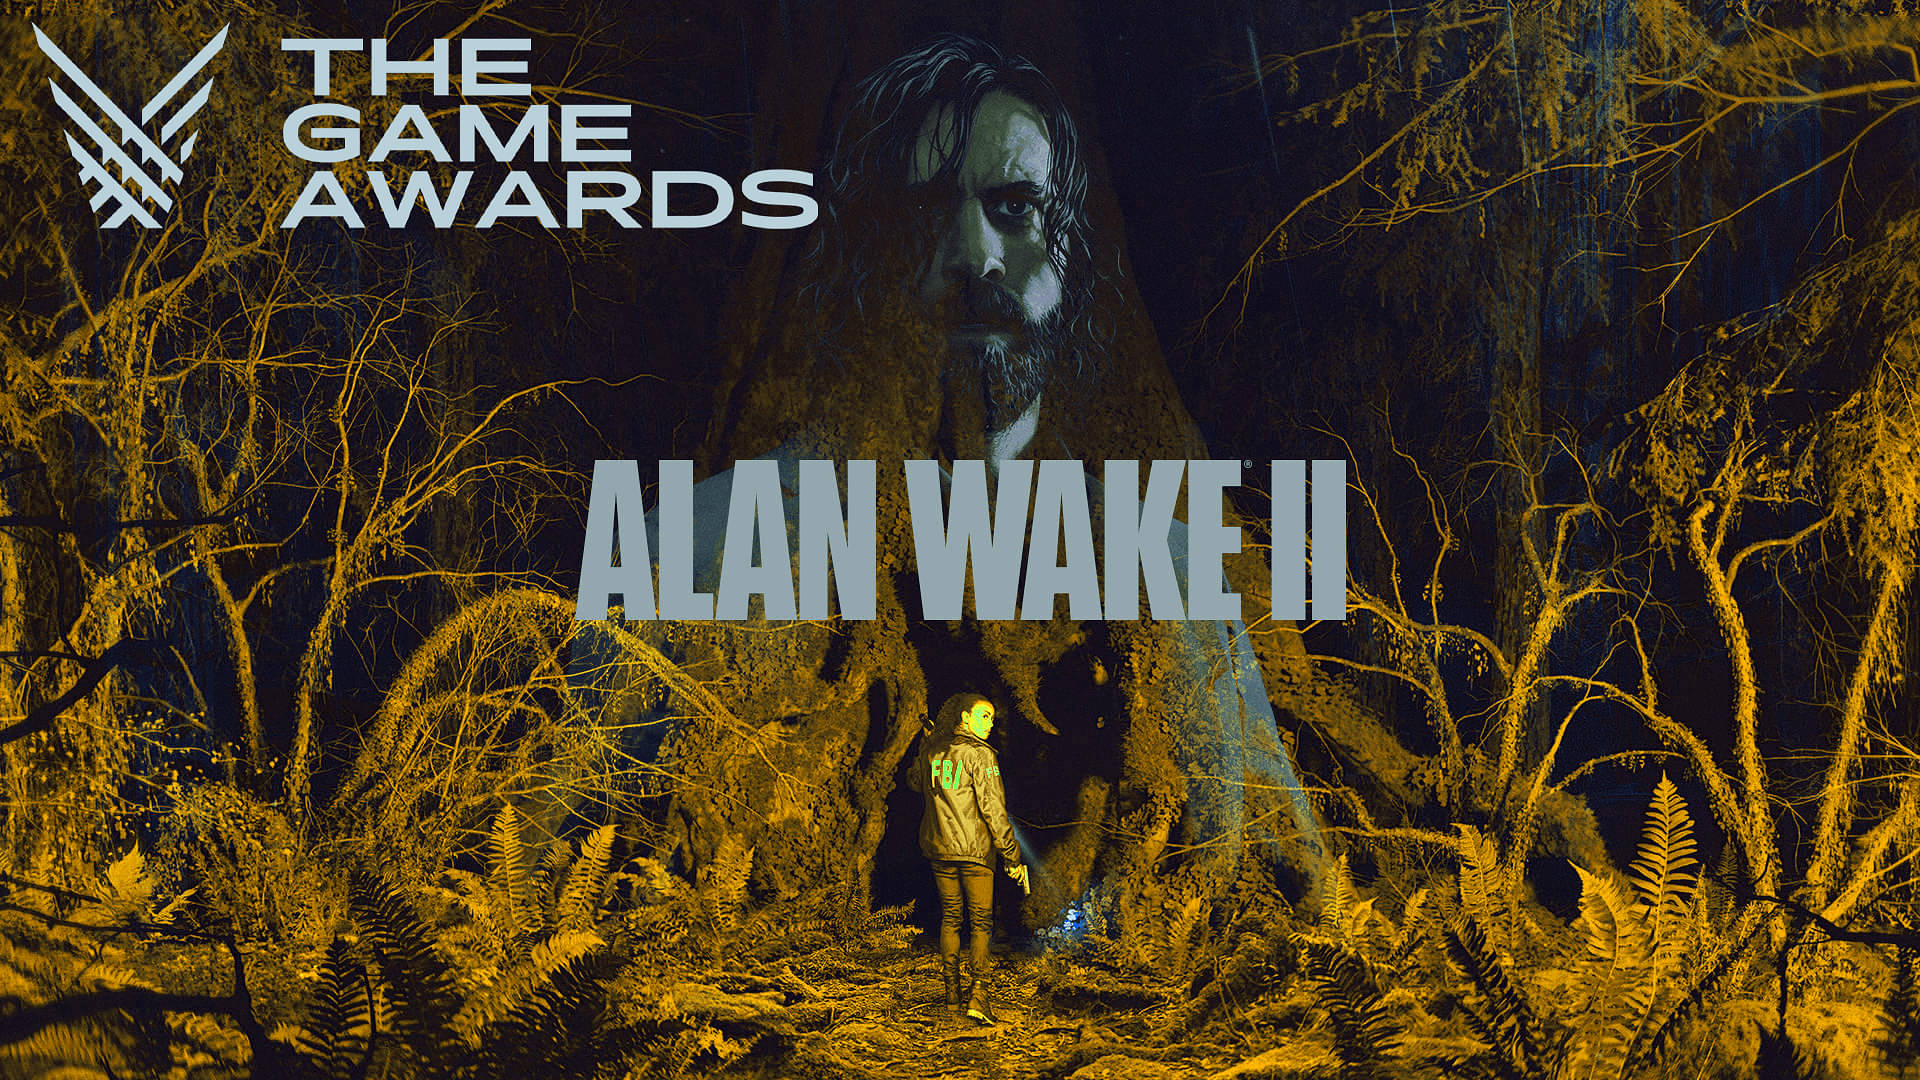 Every Alan Wake 2 review score: the best survival horror of the